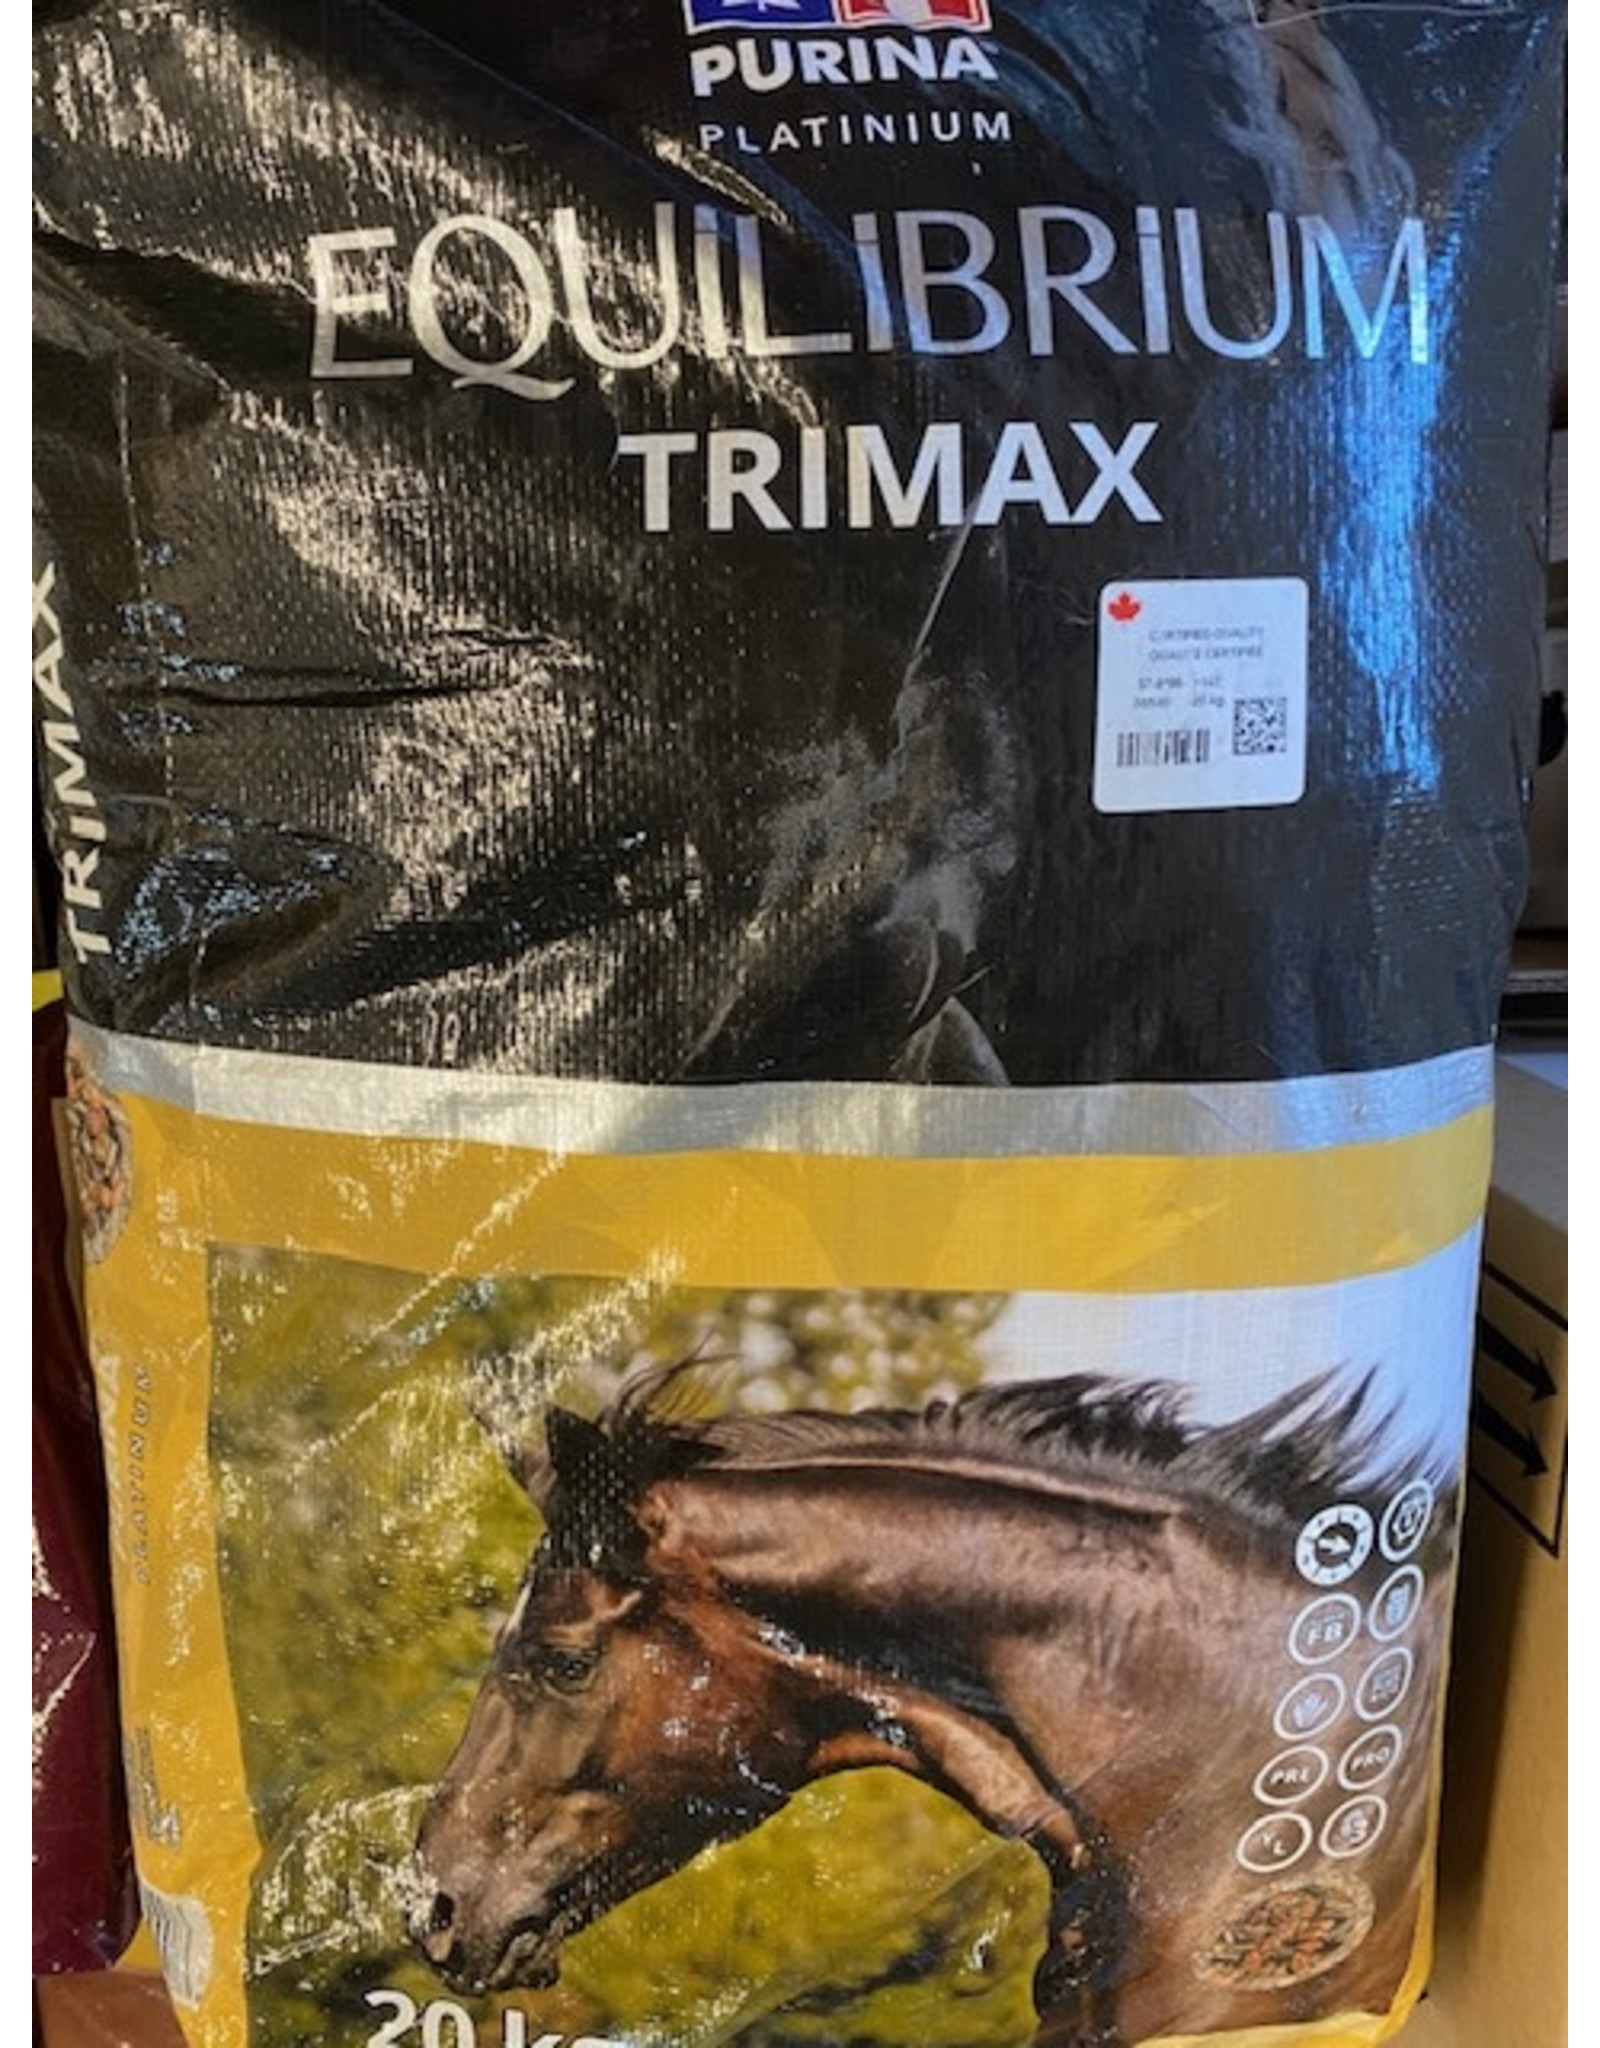 Purina PURINA EQUILIBRIUM TRIMAX 20 KG - CP35540 - NSC 22% - CP 12%, Fat 12%, Fiber 15% - Energy-dense, multi-particle feed - Intended for hard-keepers and performance horses (C-CAN)